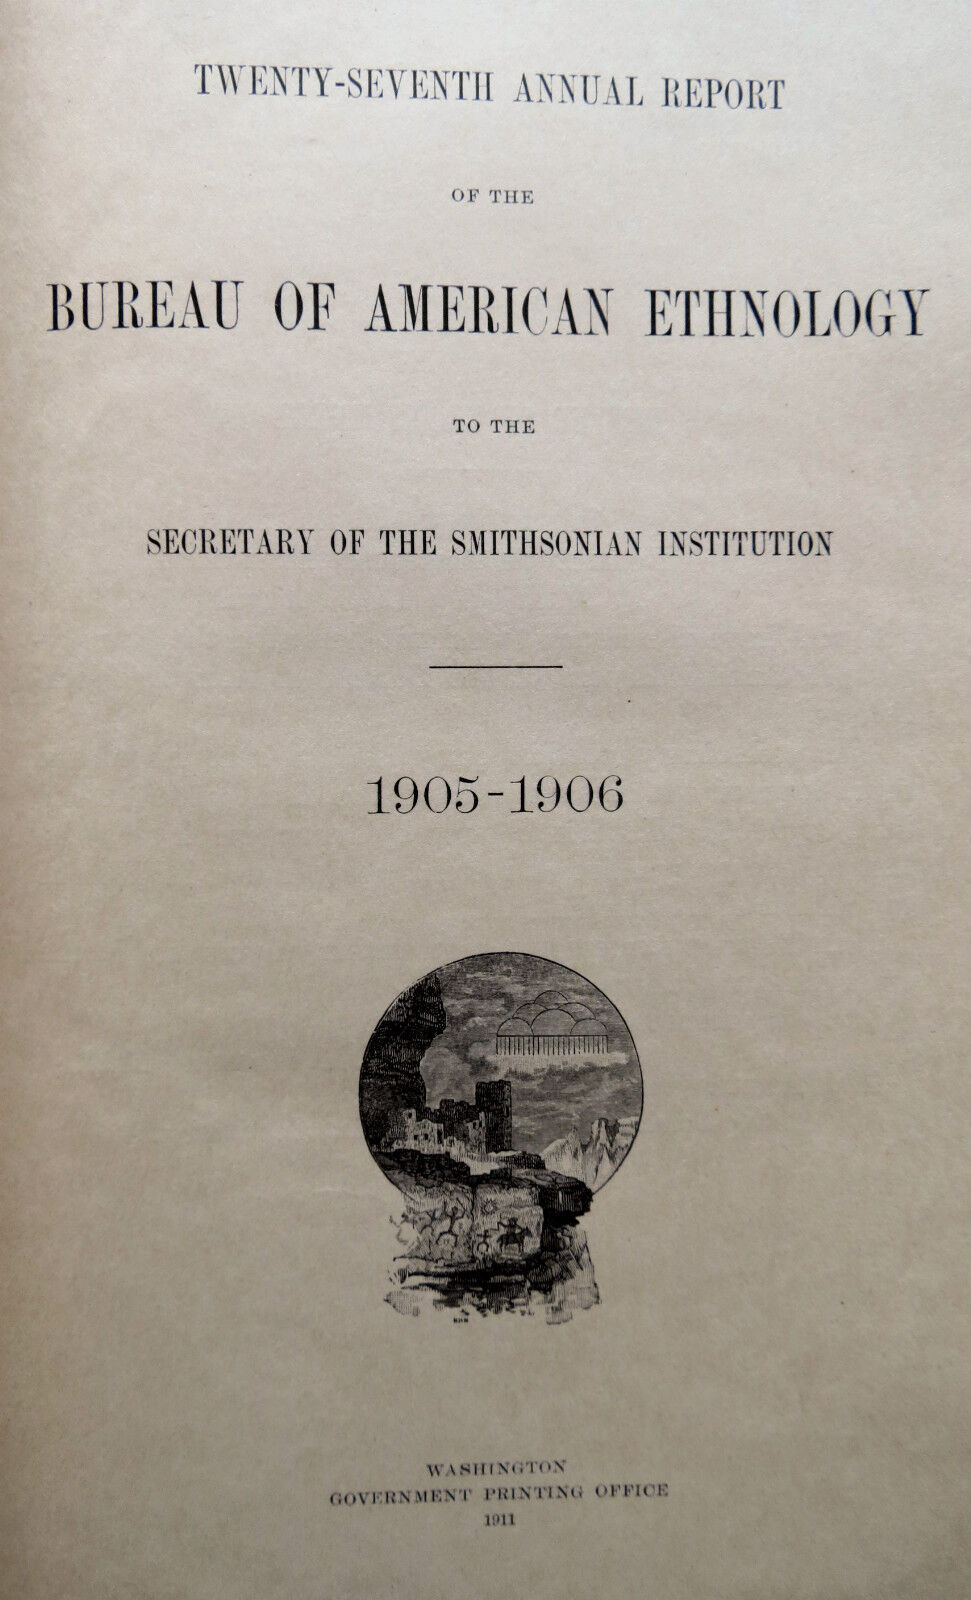 1905-06 BUREAU of AMERICAN ETHNOLOGY REPORT on OMAHA TRIBE of INDIANS - AS IS